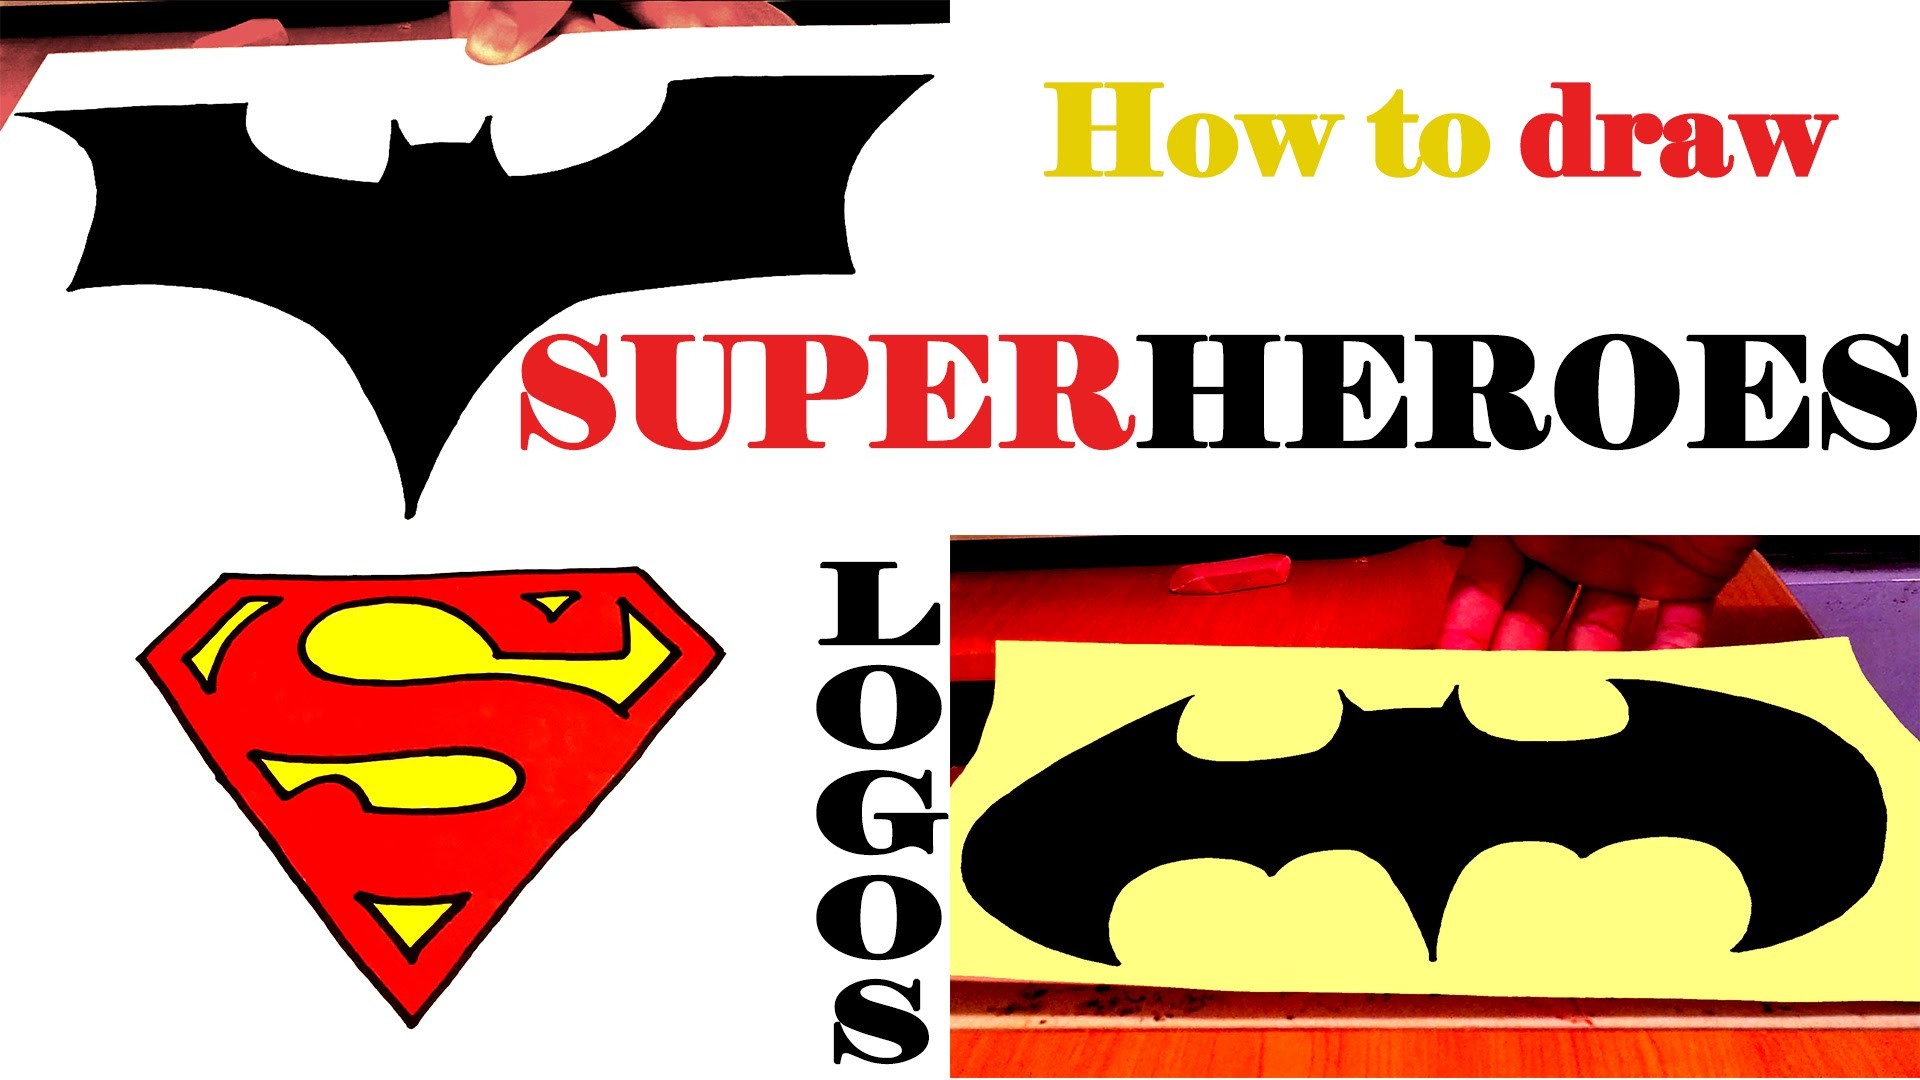 How to draw SUPERHEROES Logos for Beginners Step by Step